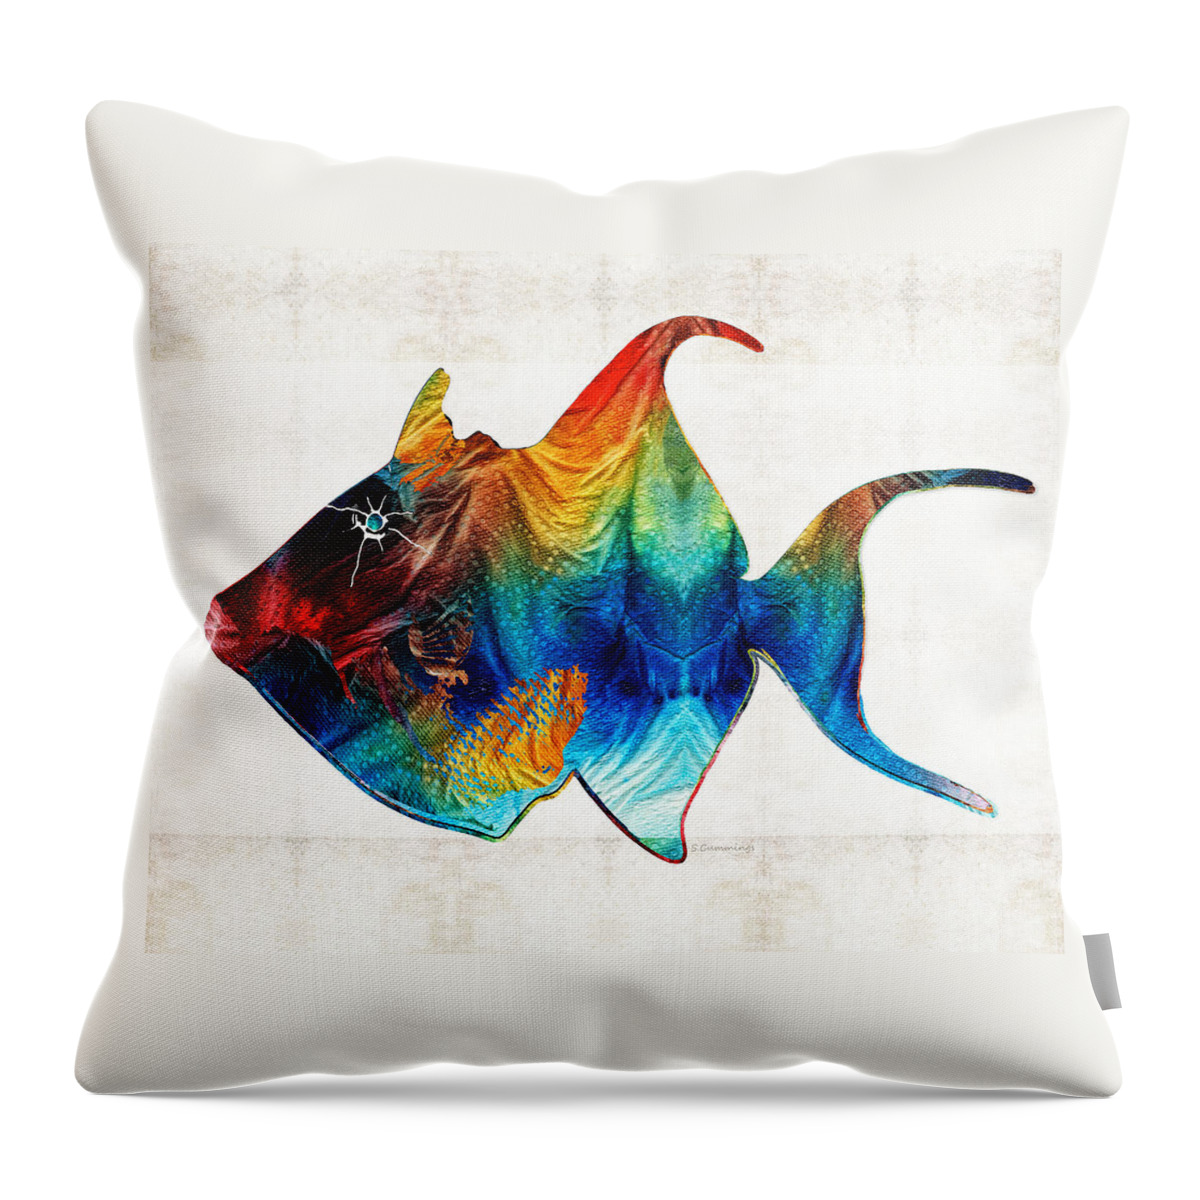 Triggerfish Throw Pillow featuring the painting Trigger Happy Fish Art by Sharon Cummings by Sharon Cummings